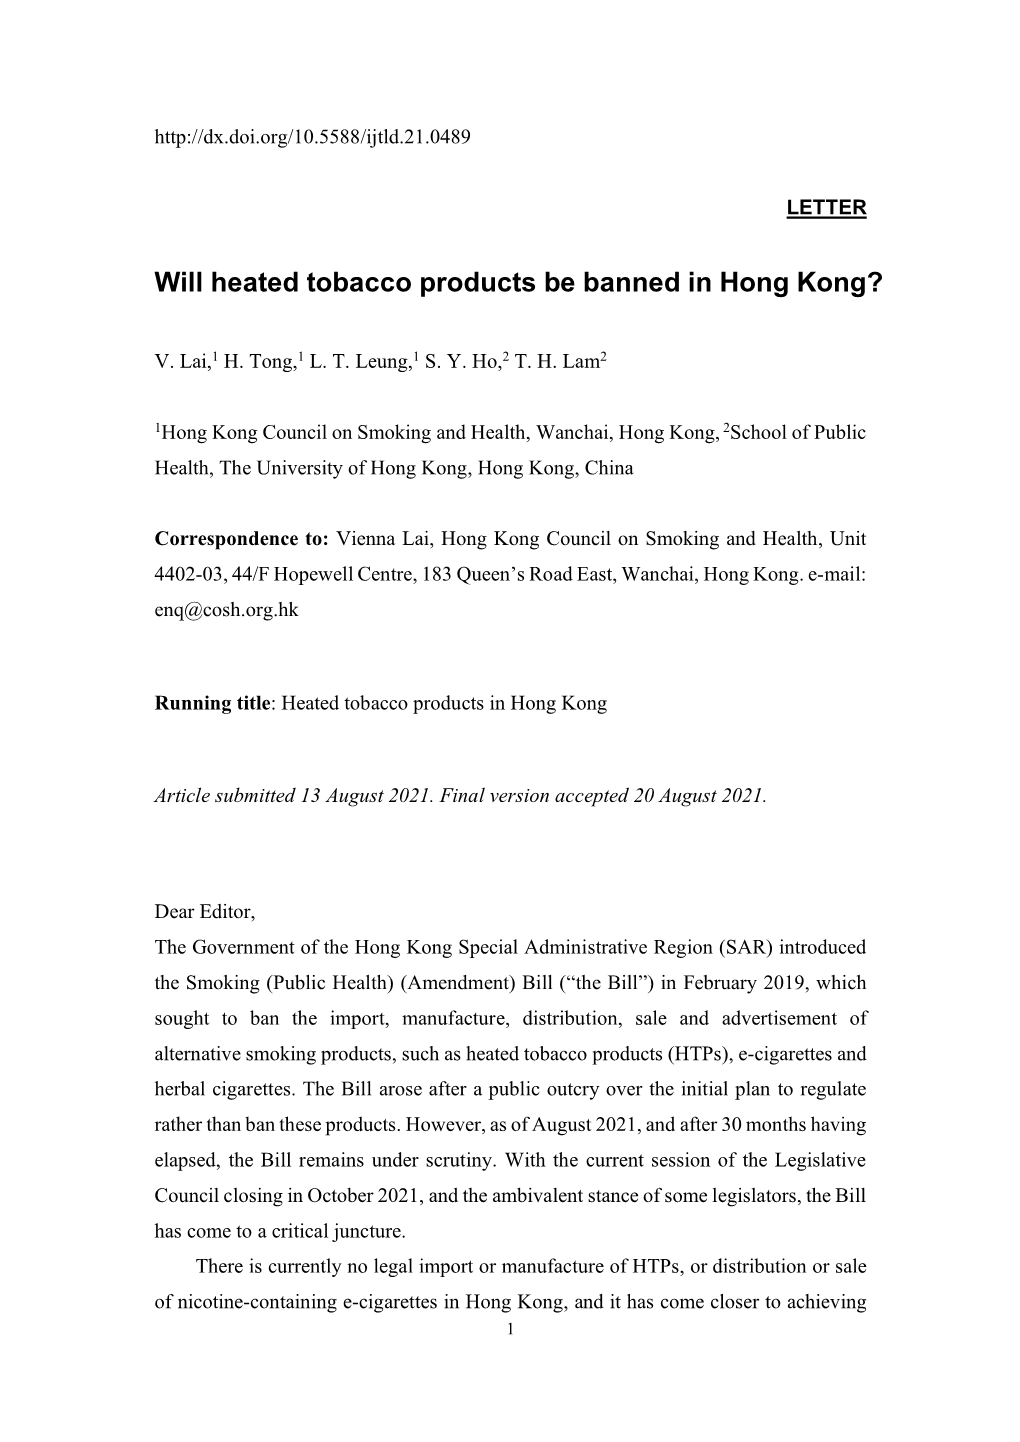 Will Heated Tobacco Products Be Banned in Hong Kong?